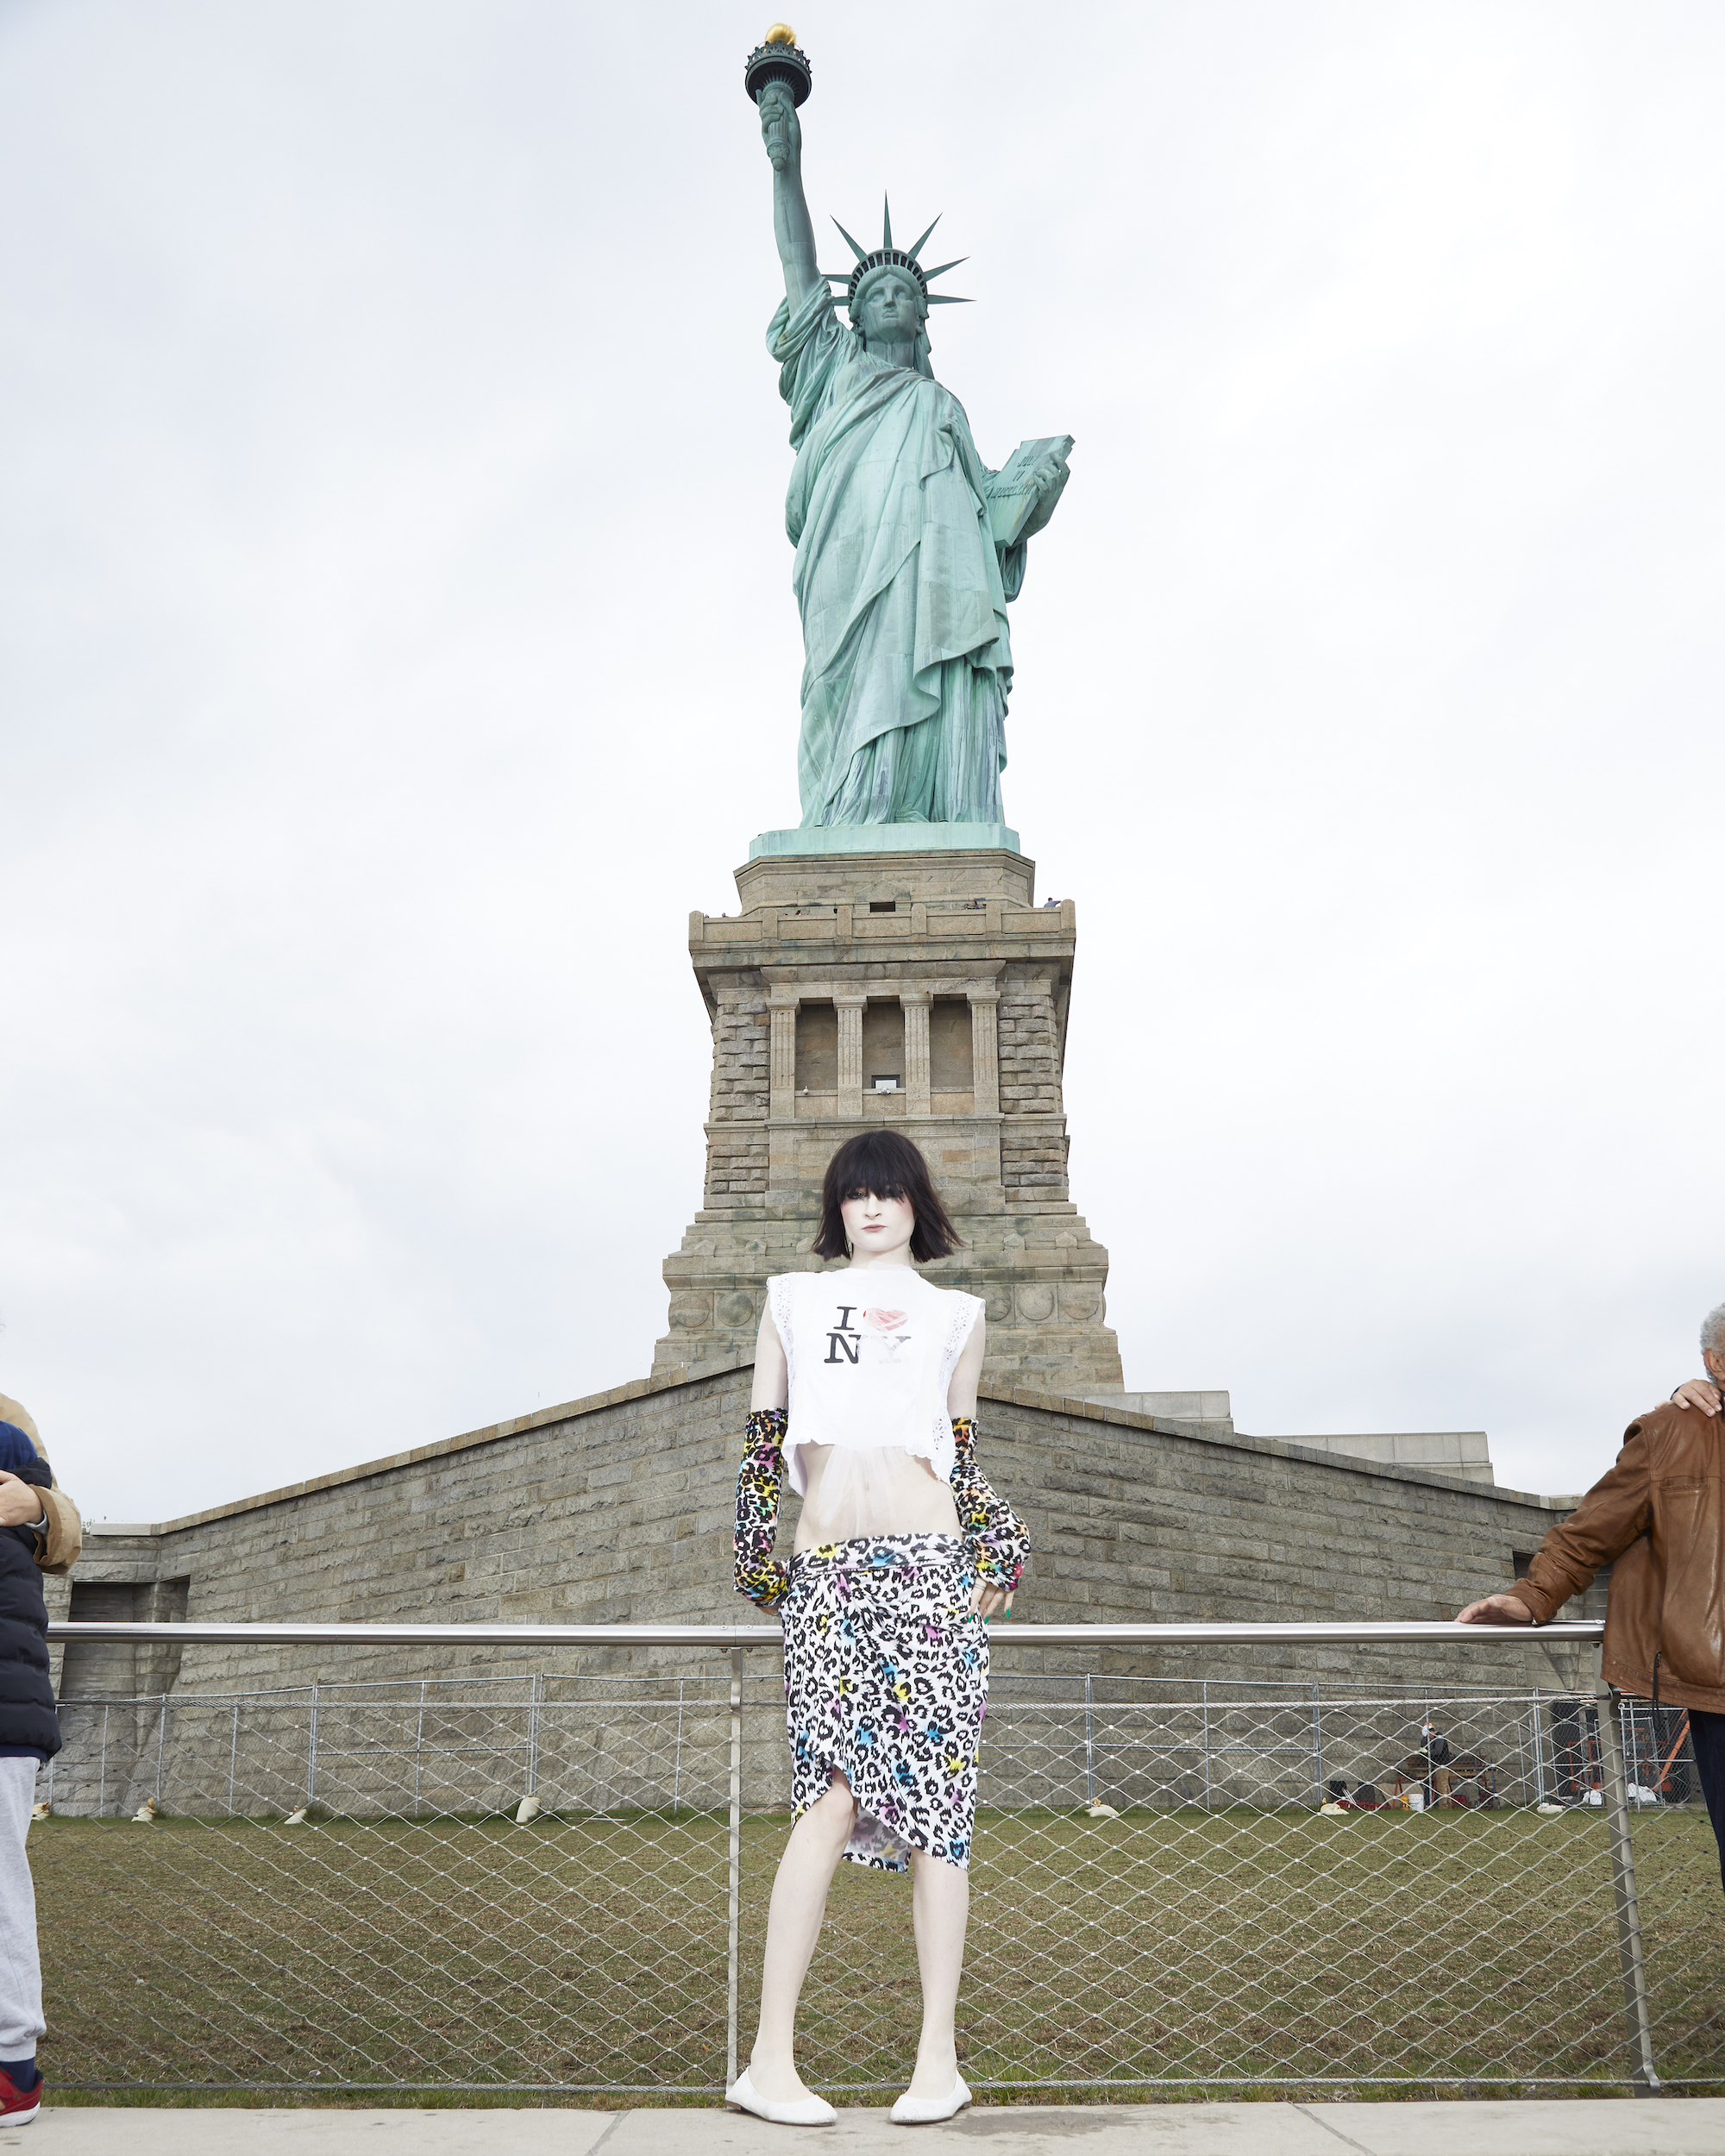 ren g wearing an I love new york t-shirt posing in front of the statue of liberty